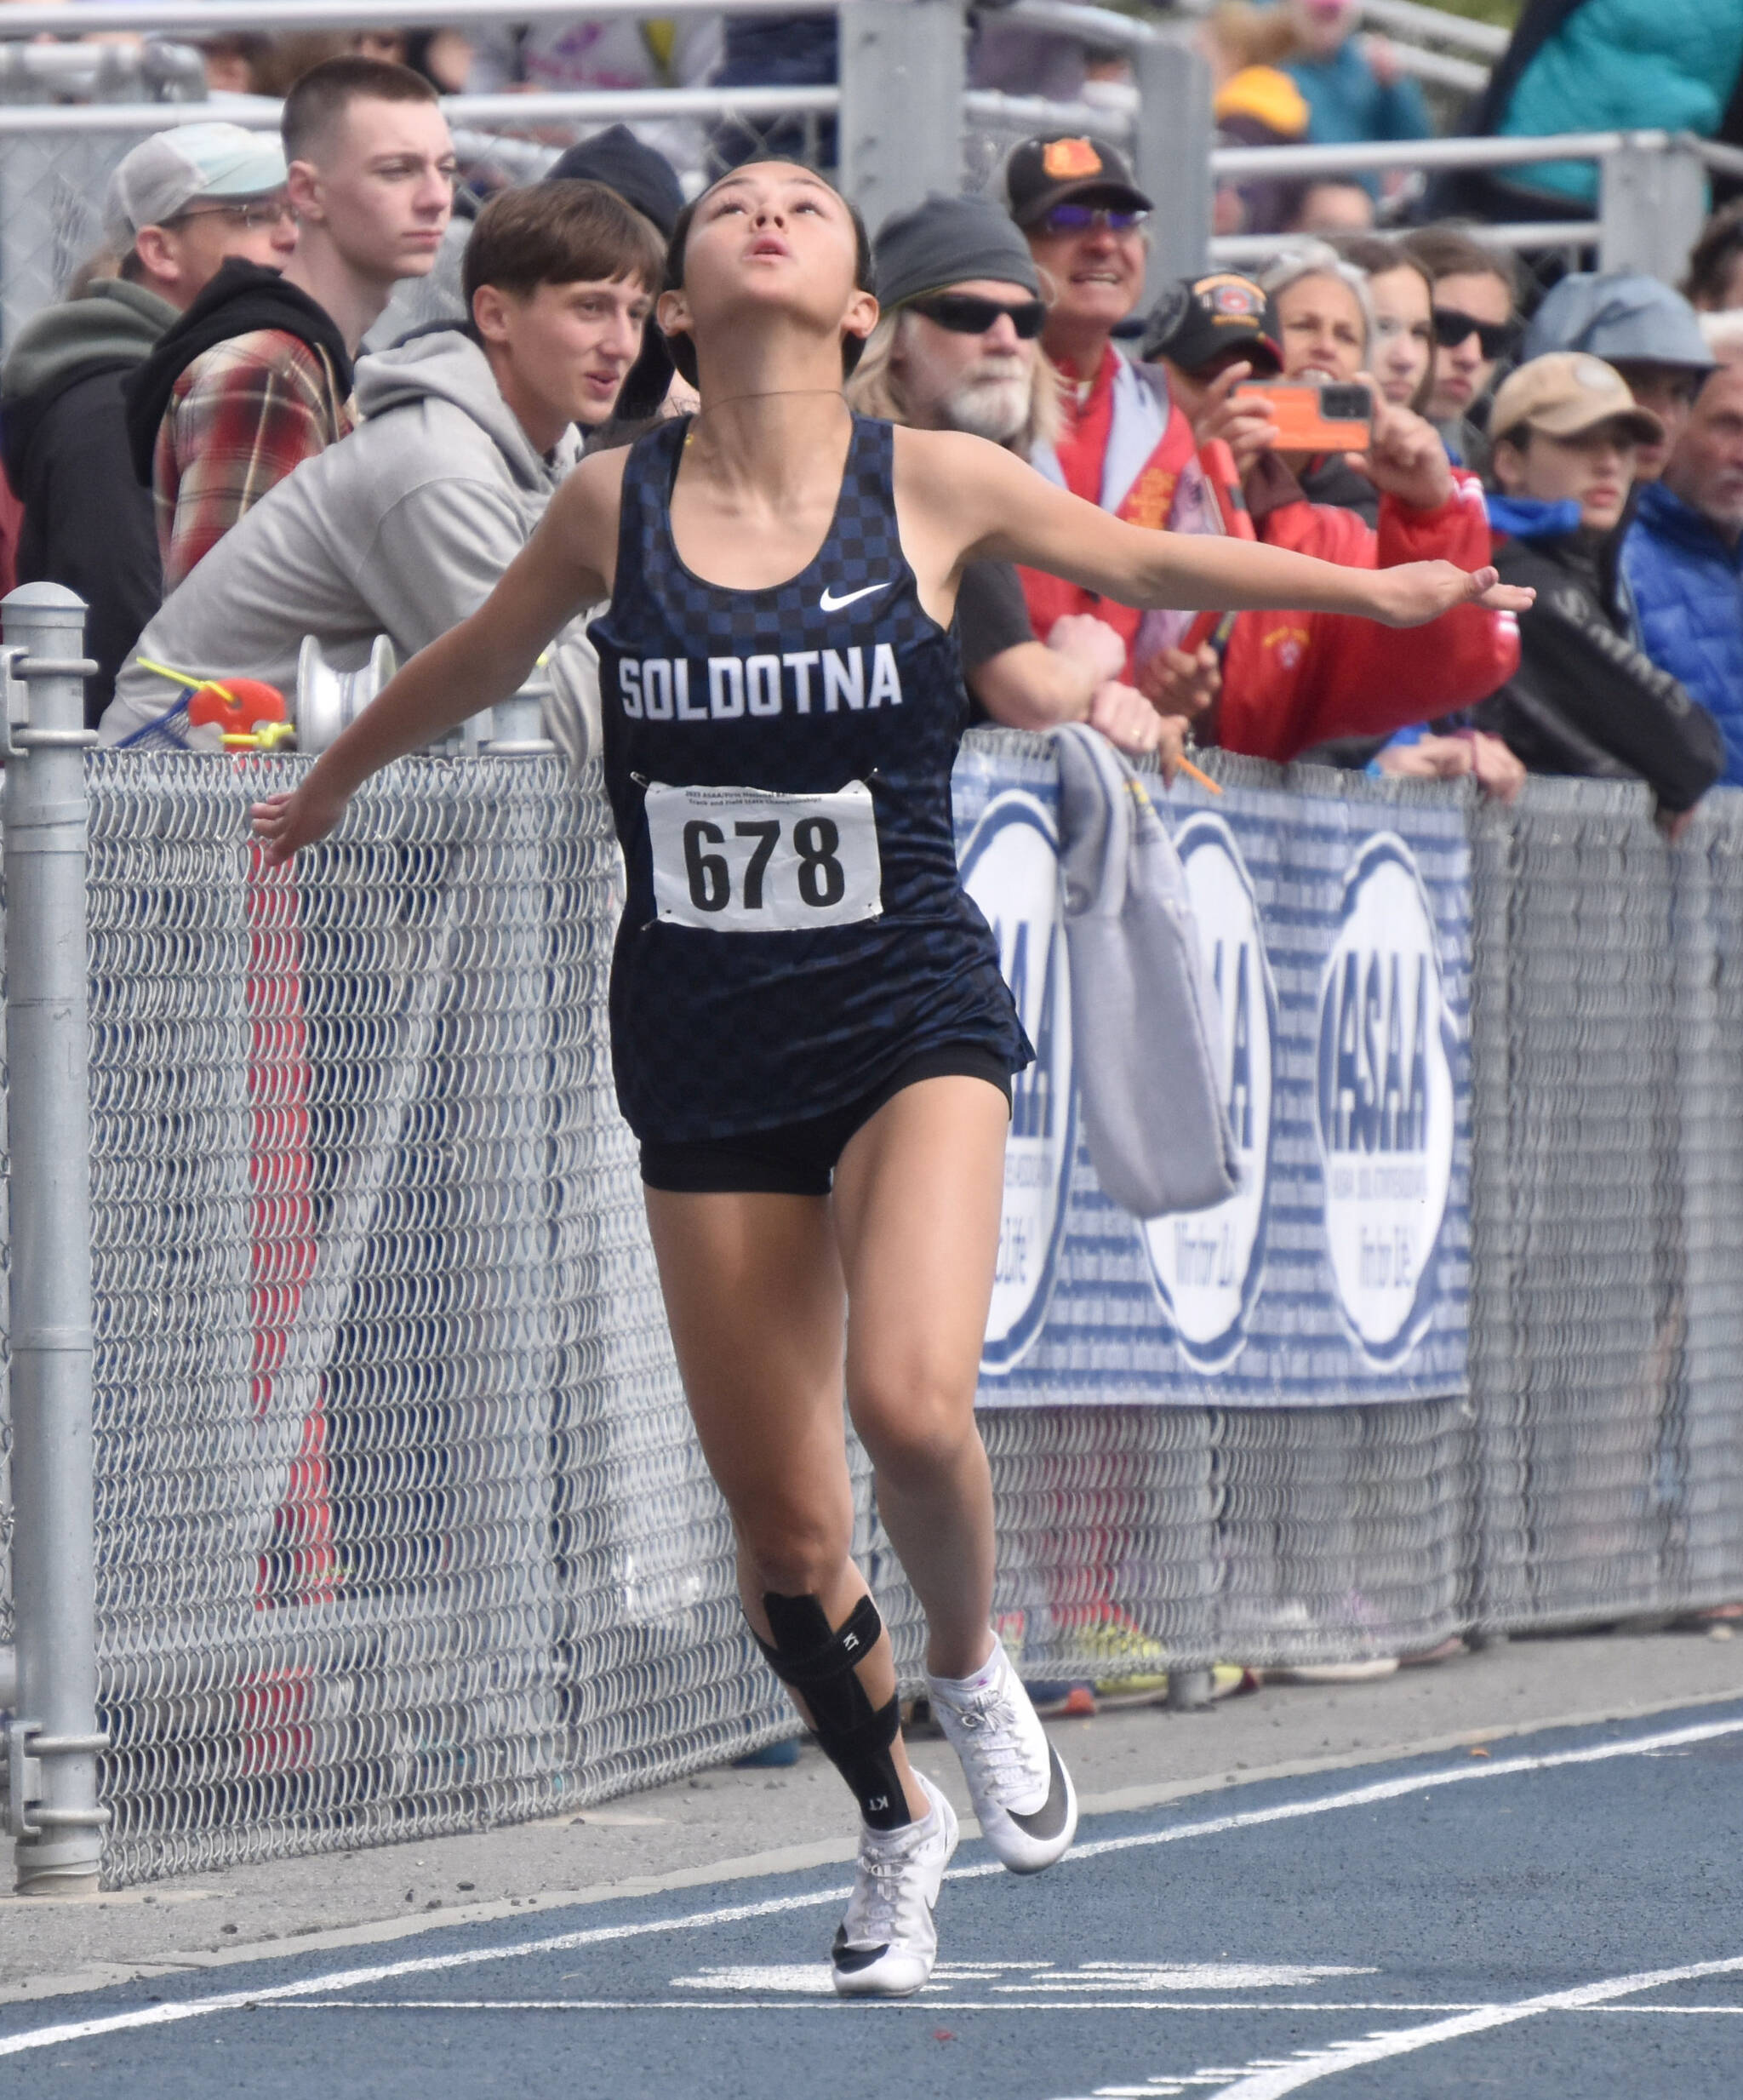 Soldotna’s Emma Glassmaker finishes fourth in the Division I 100 meters Saturday, May 27, 2023, at the state track and field meet in Palmer, Alaska. (Photo by Jeff Helminiak/Peninsula Clarion)